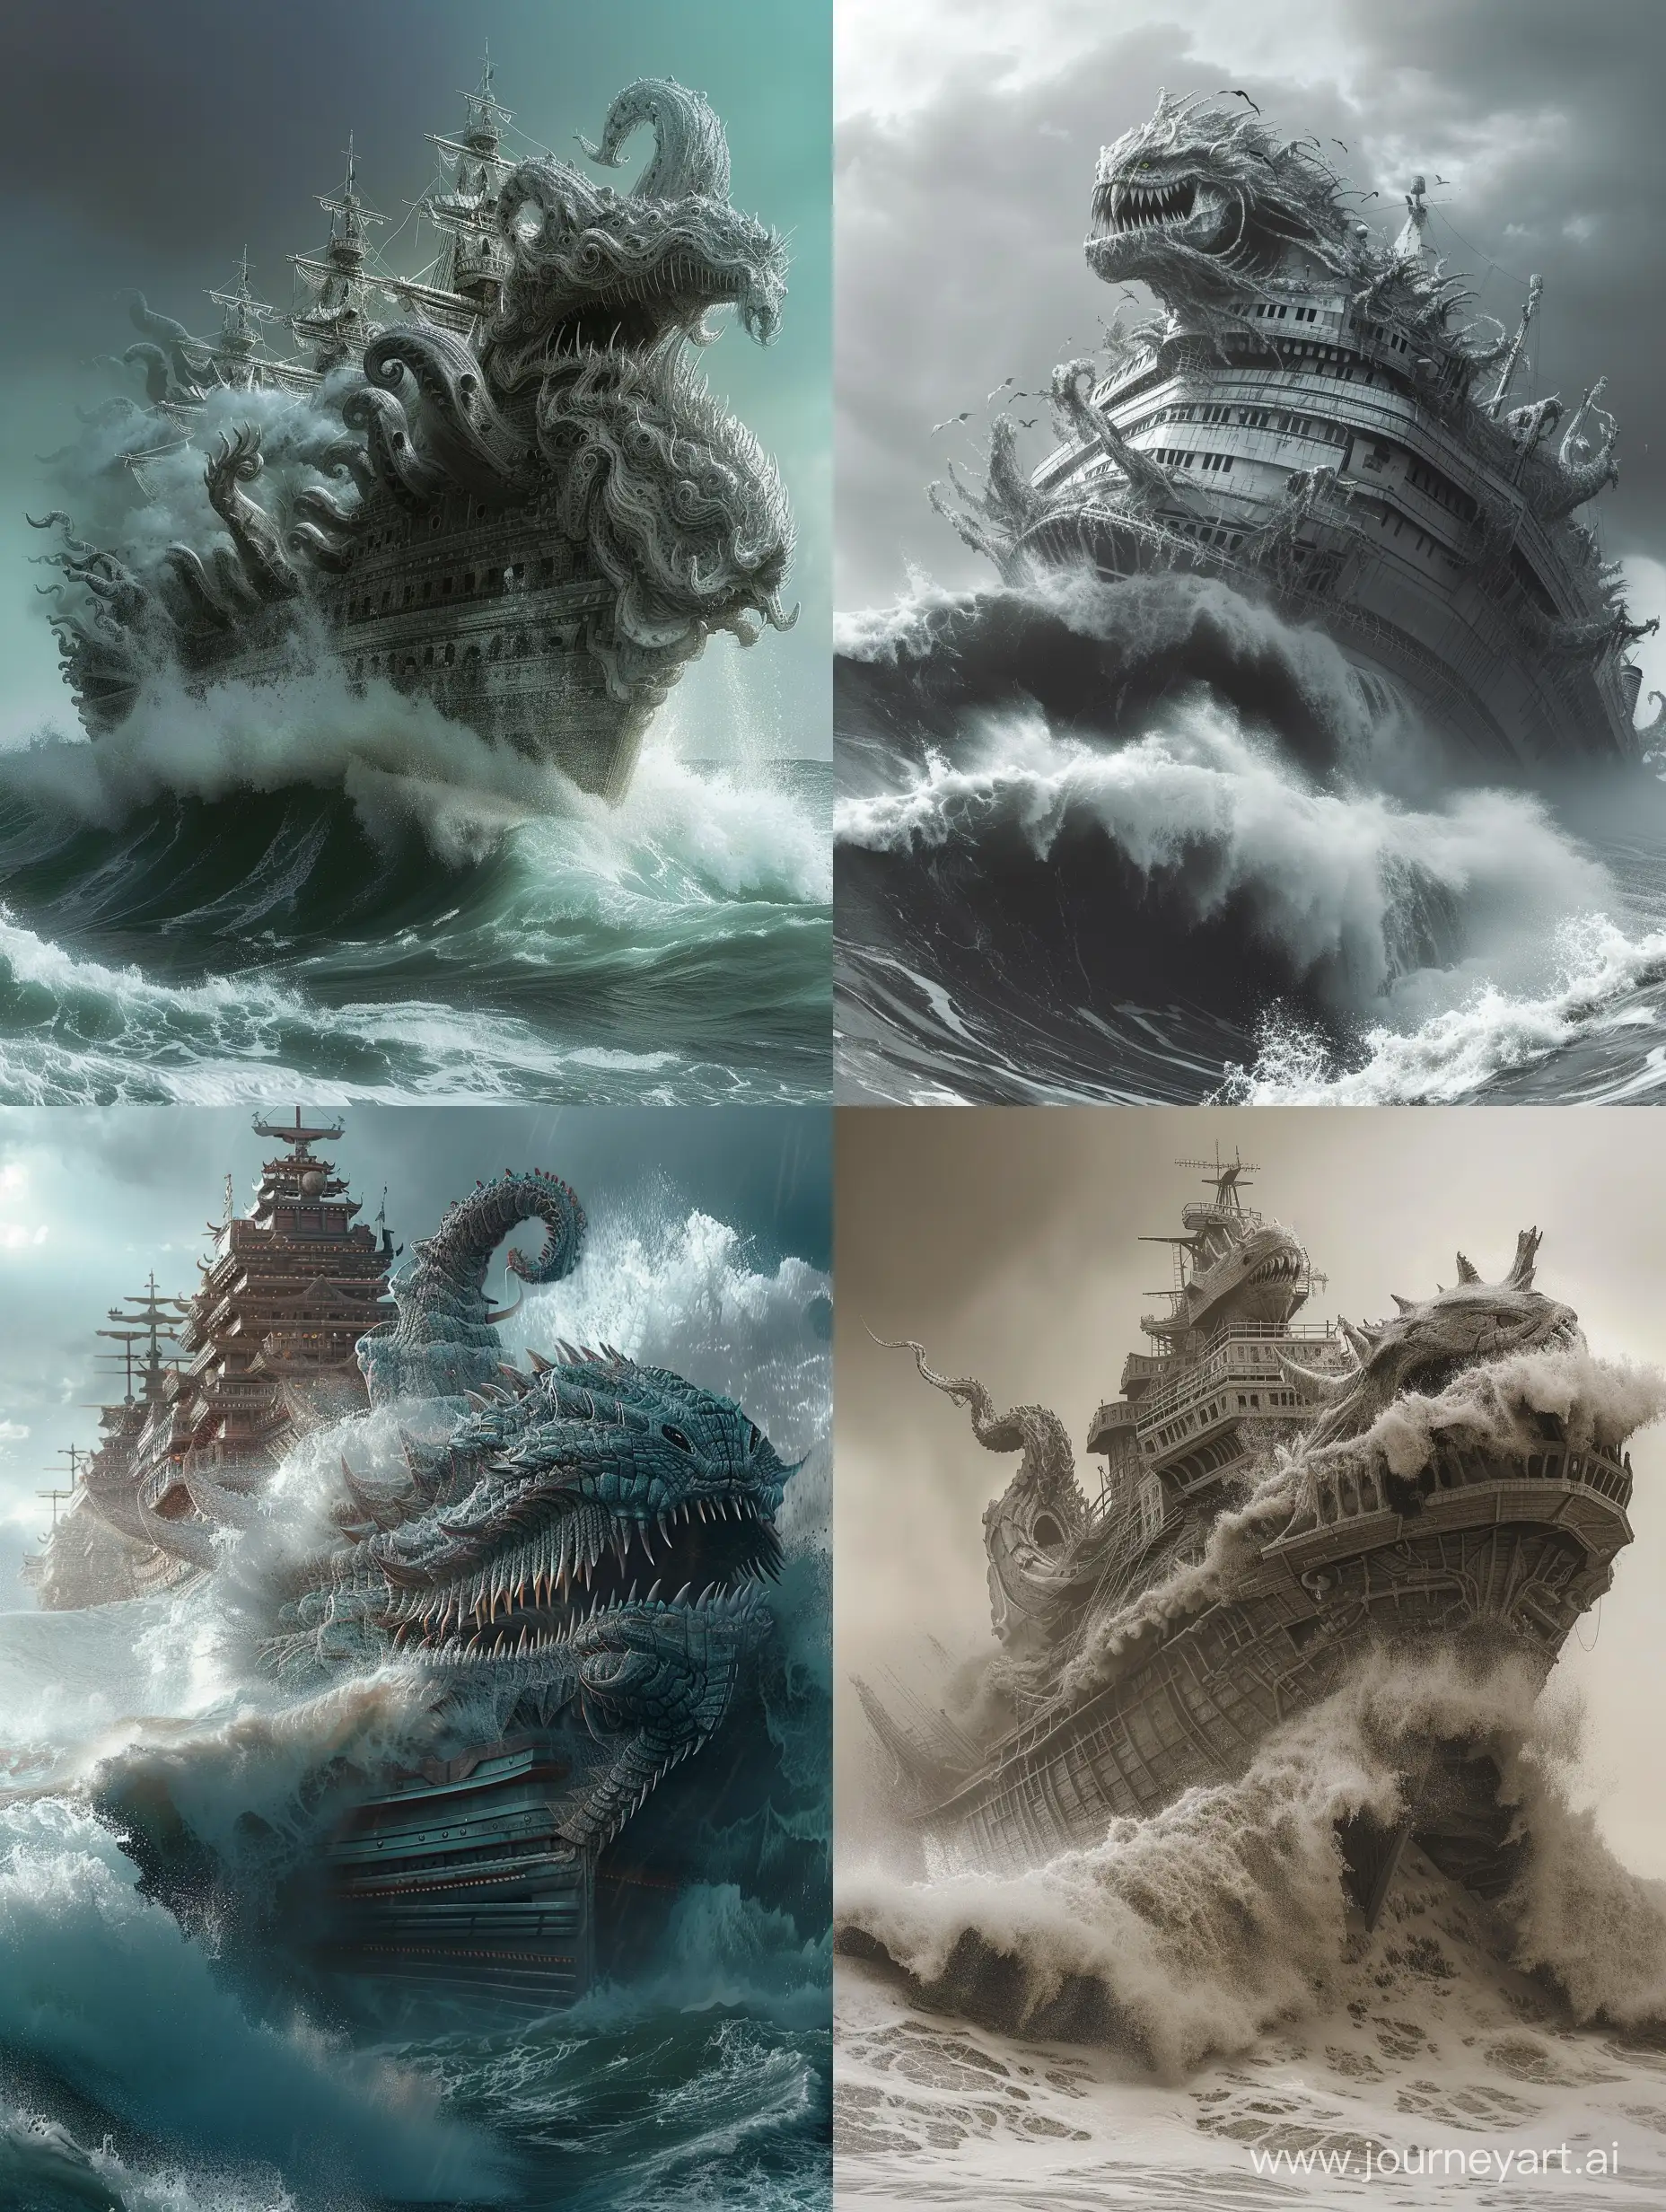 waves crashing on A huge ship in the shape of monster , intricate, incredible detail , terrifying , Digital Art , Imaginary image , fantasy.